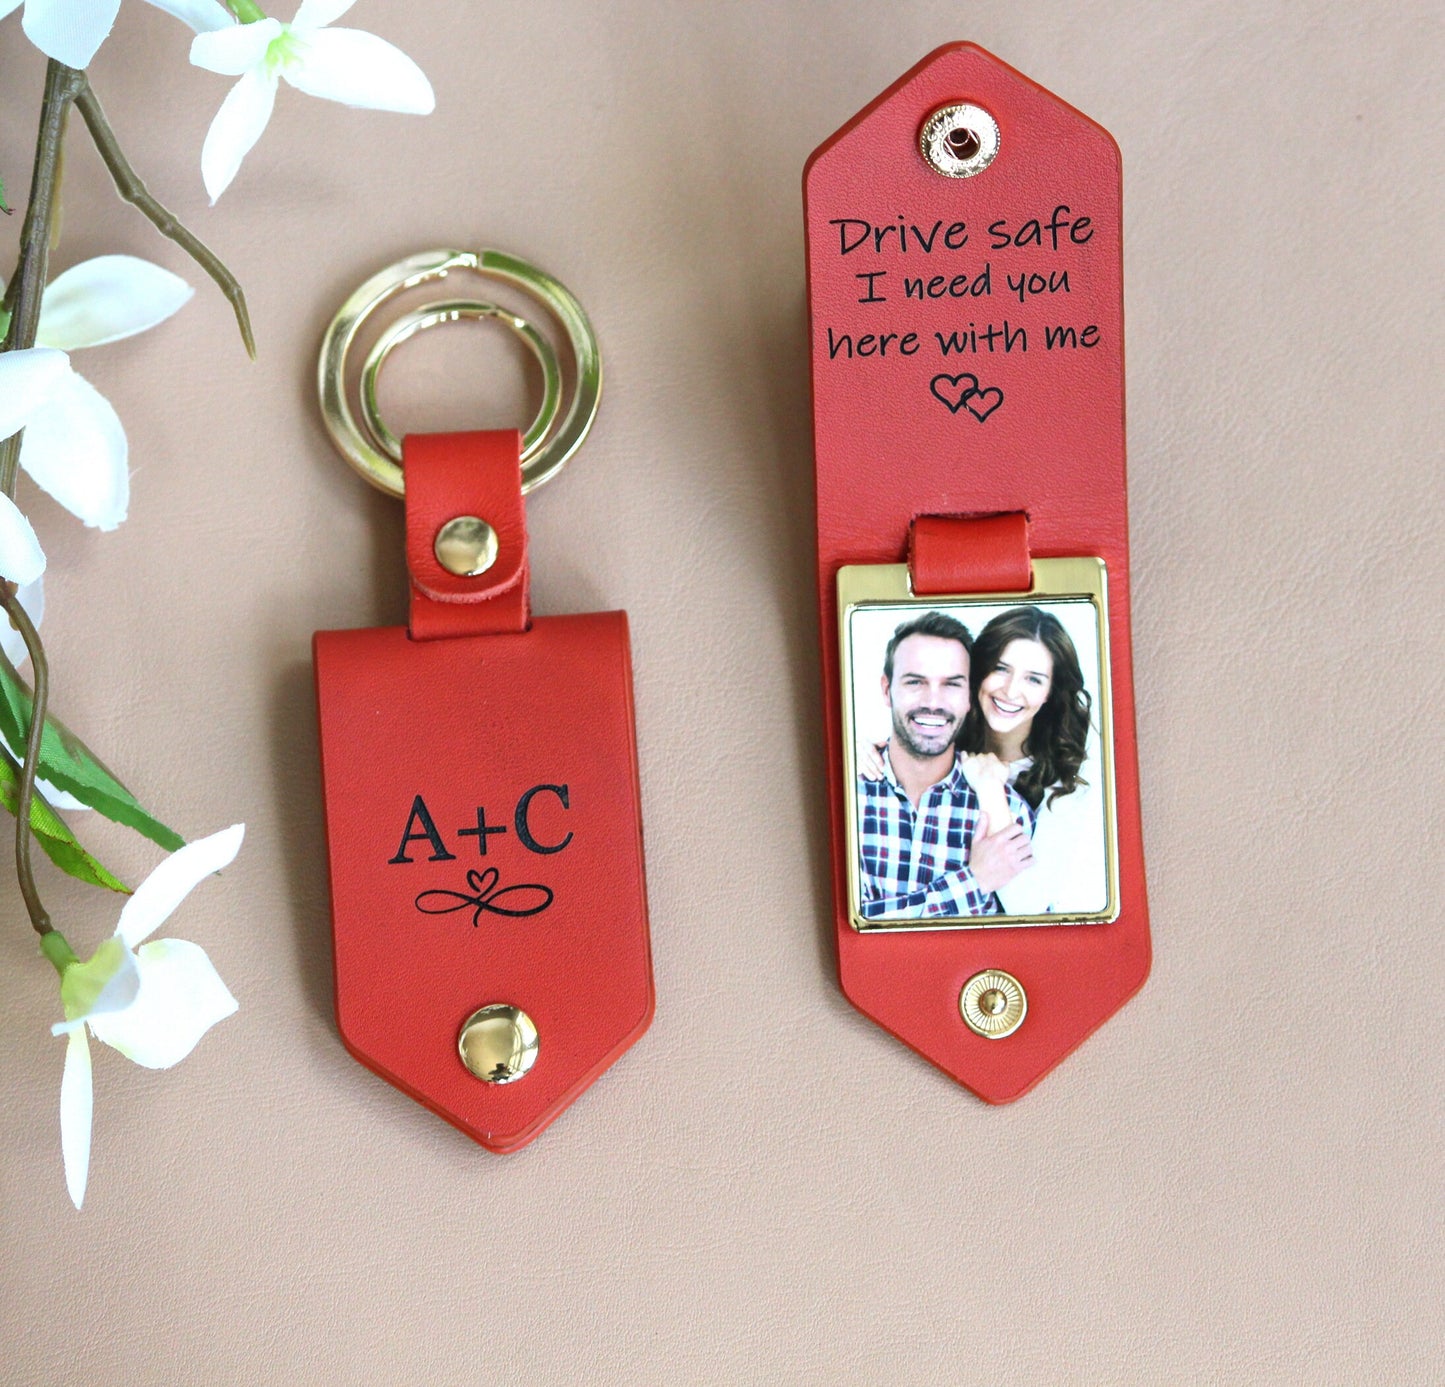 Personalized Accessories, Photo Keychain Husband Boyfriend Anniversary Calendar,1st Dating Date, Drive Safe Keychain, Christmas Gift for Men